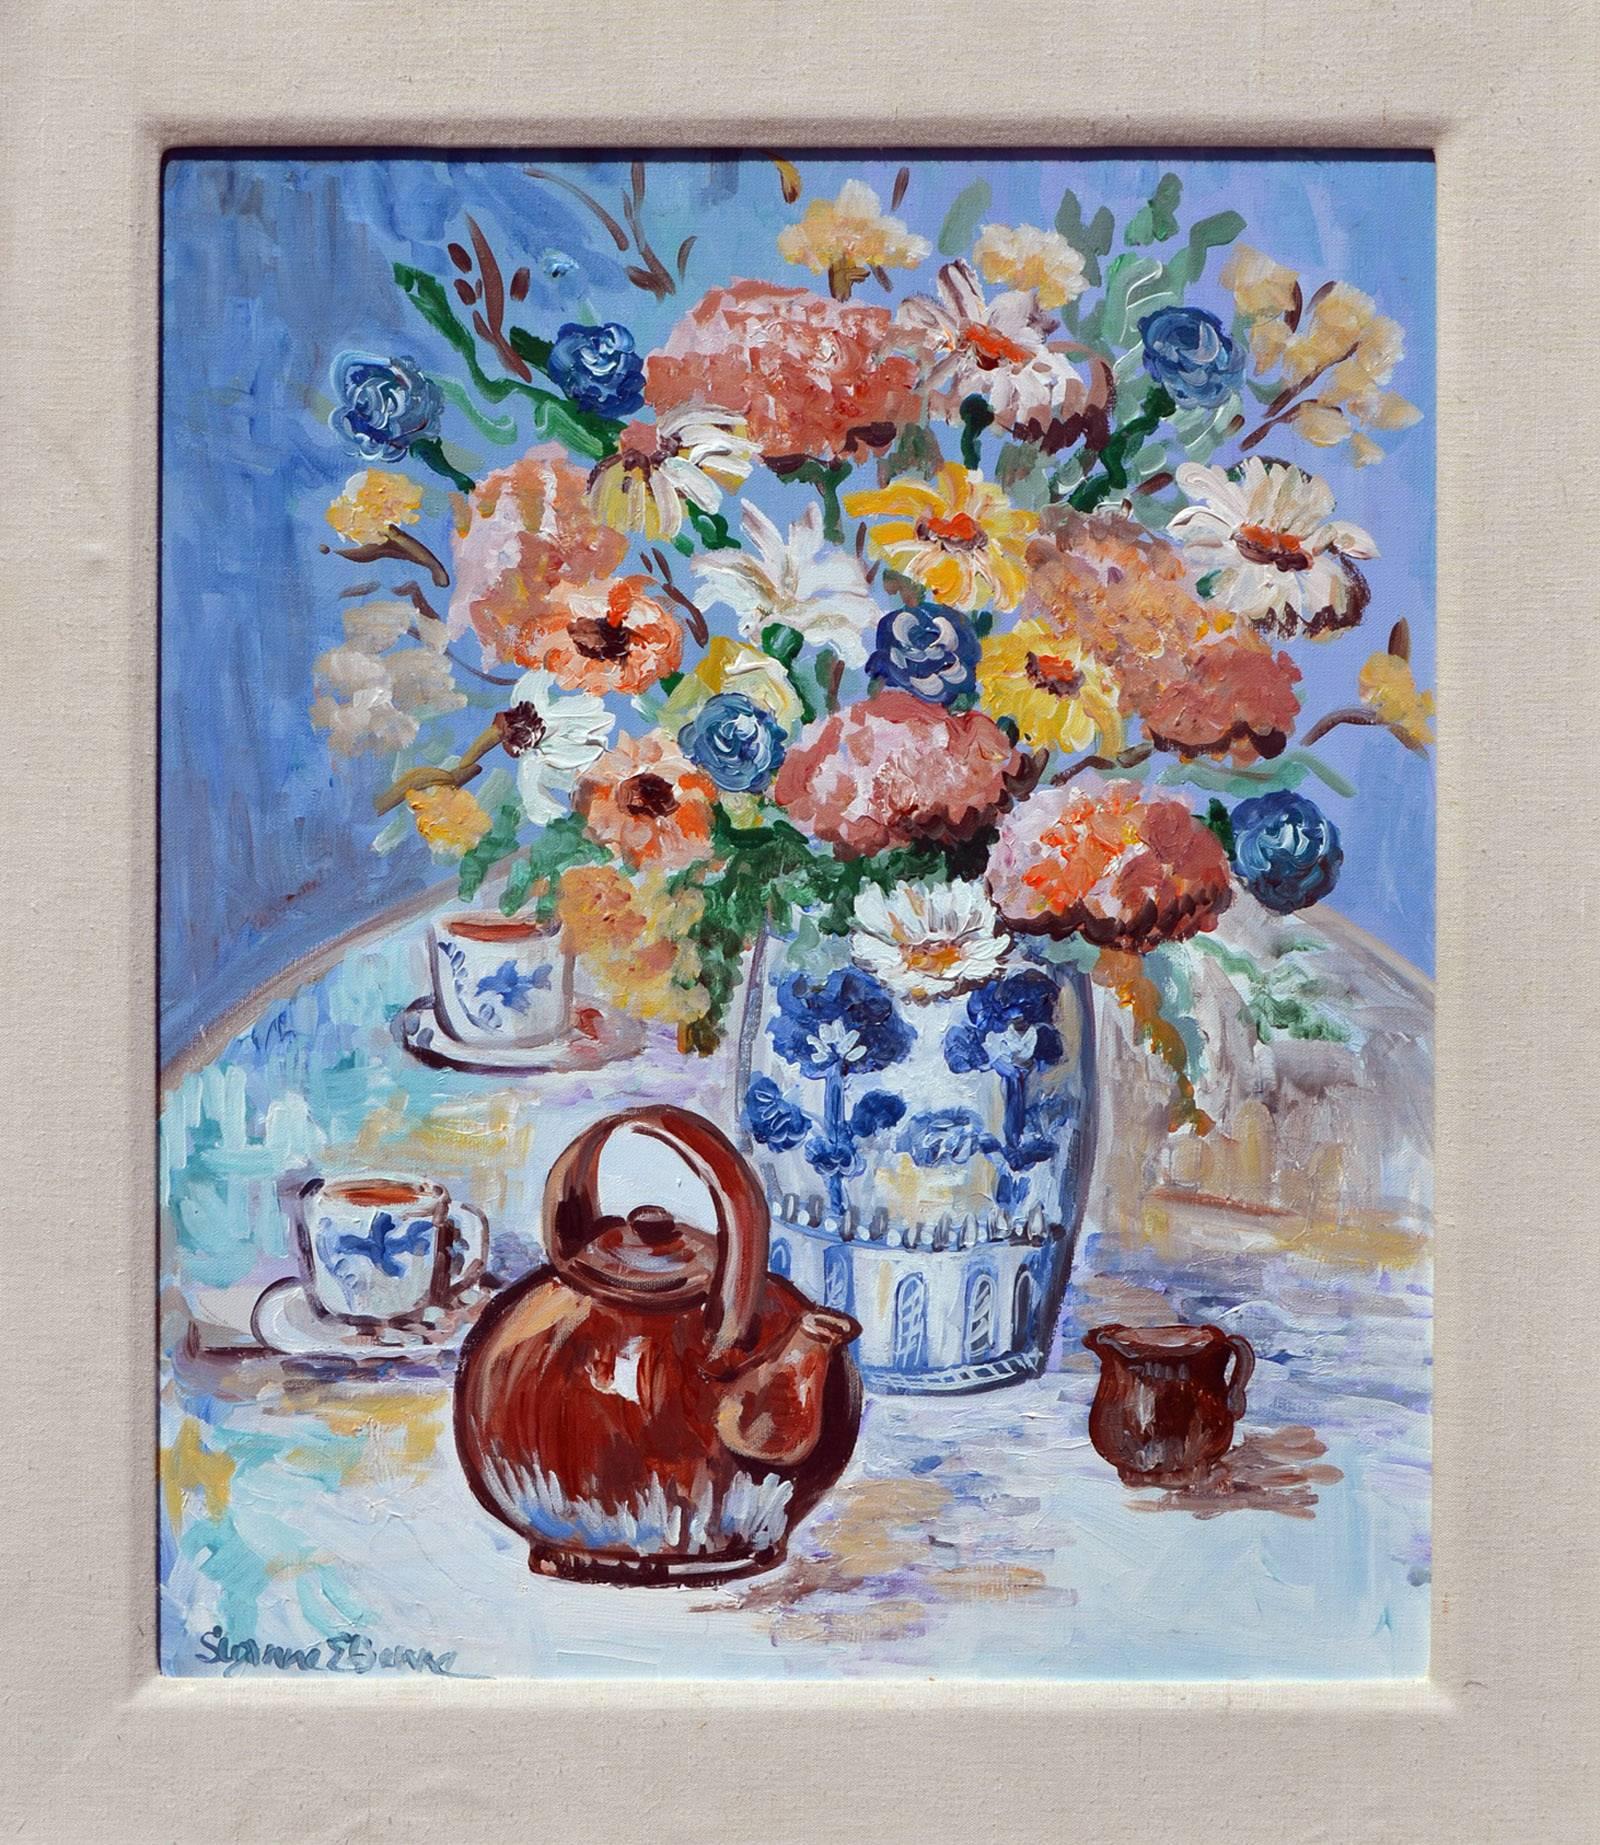 Flower Vase and Teapot Still Life - Painting by Susanne E. Benne